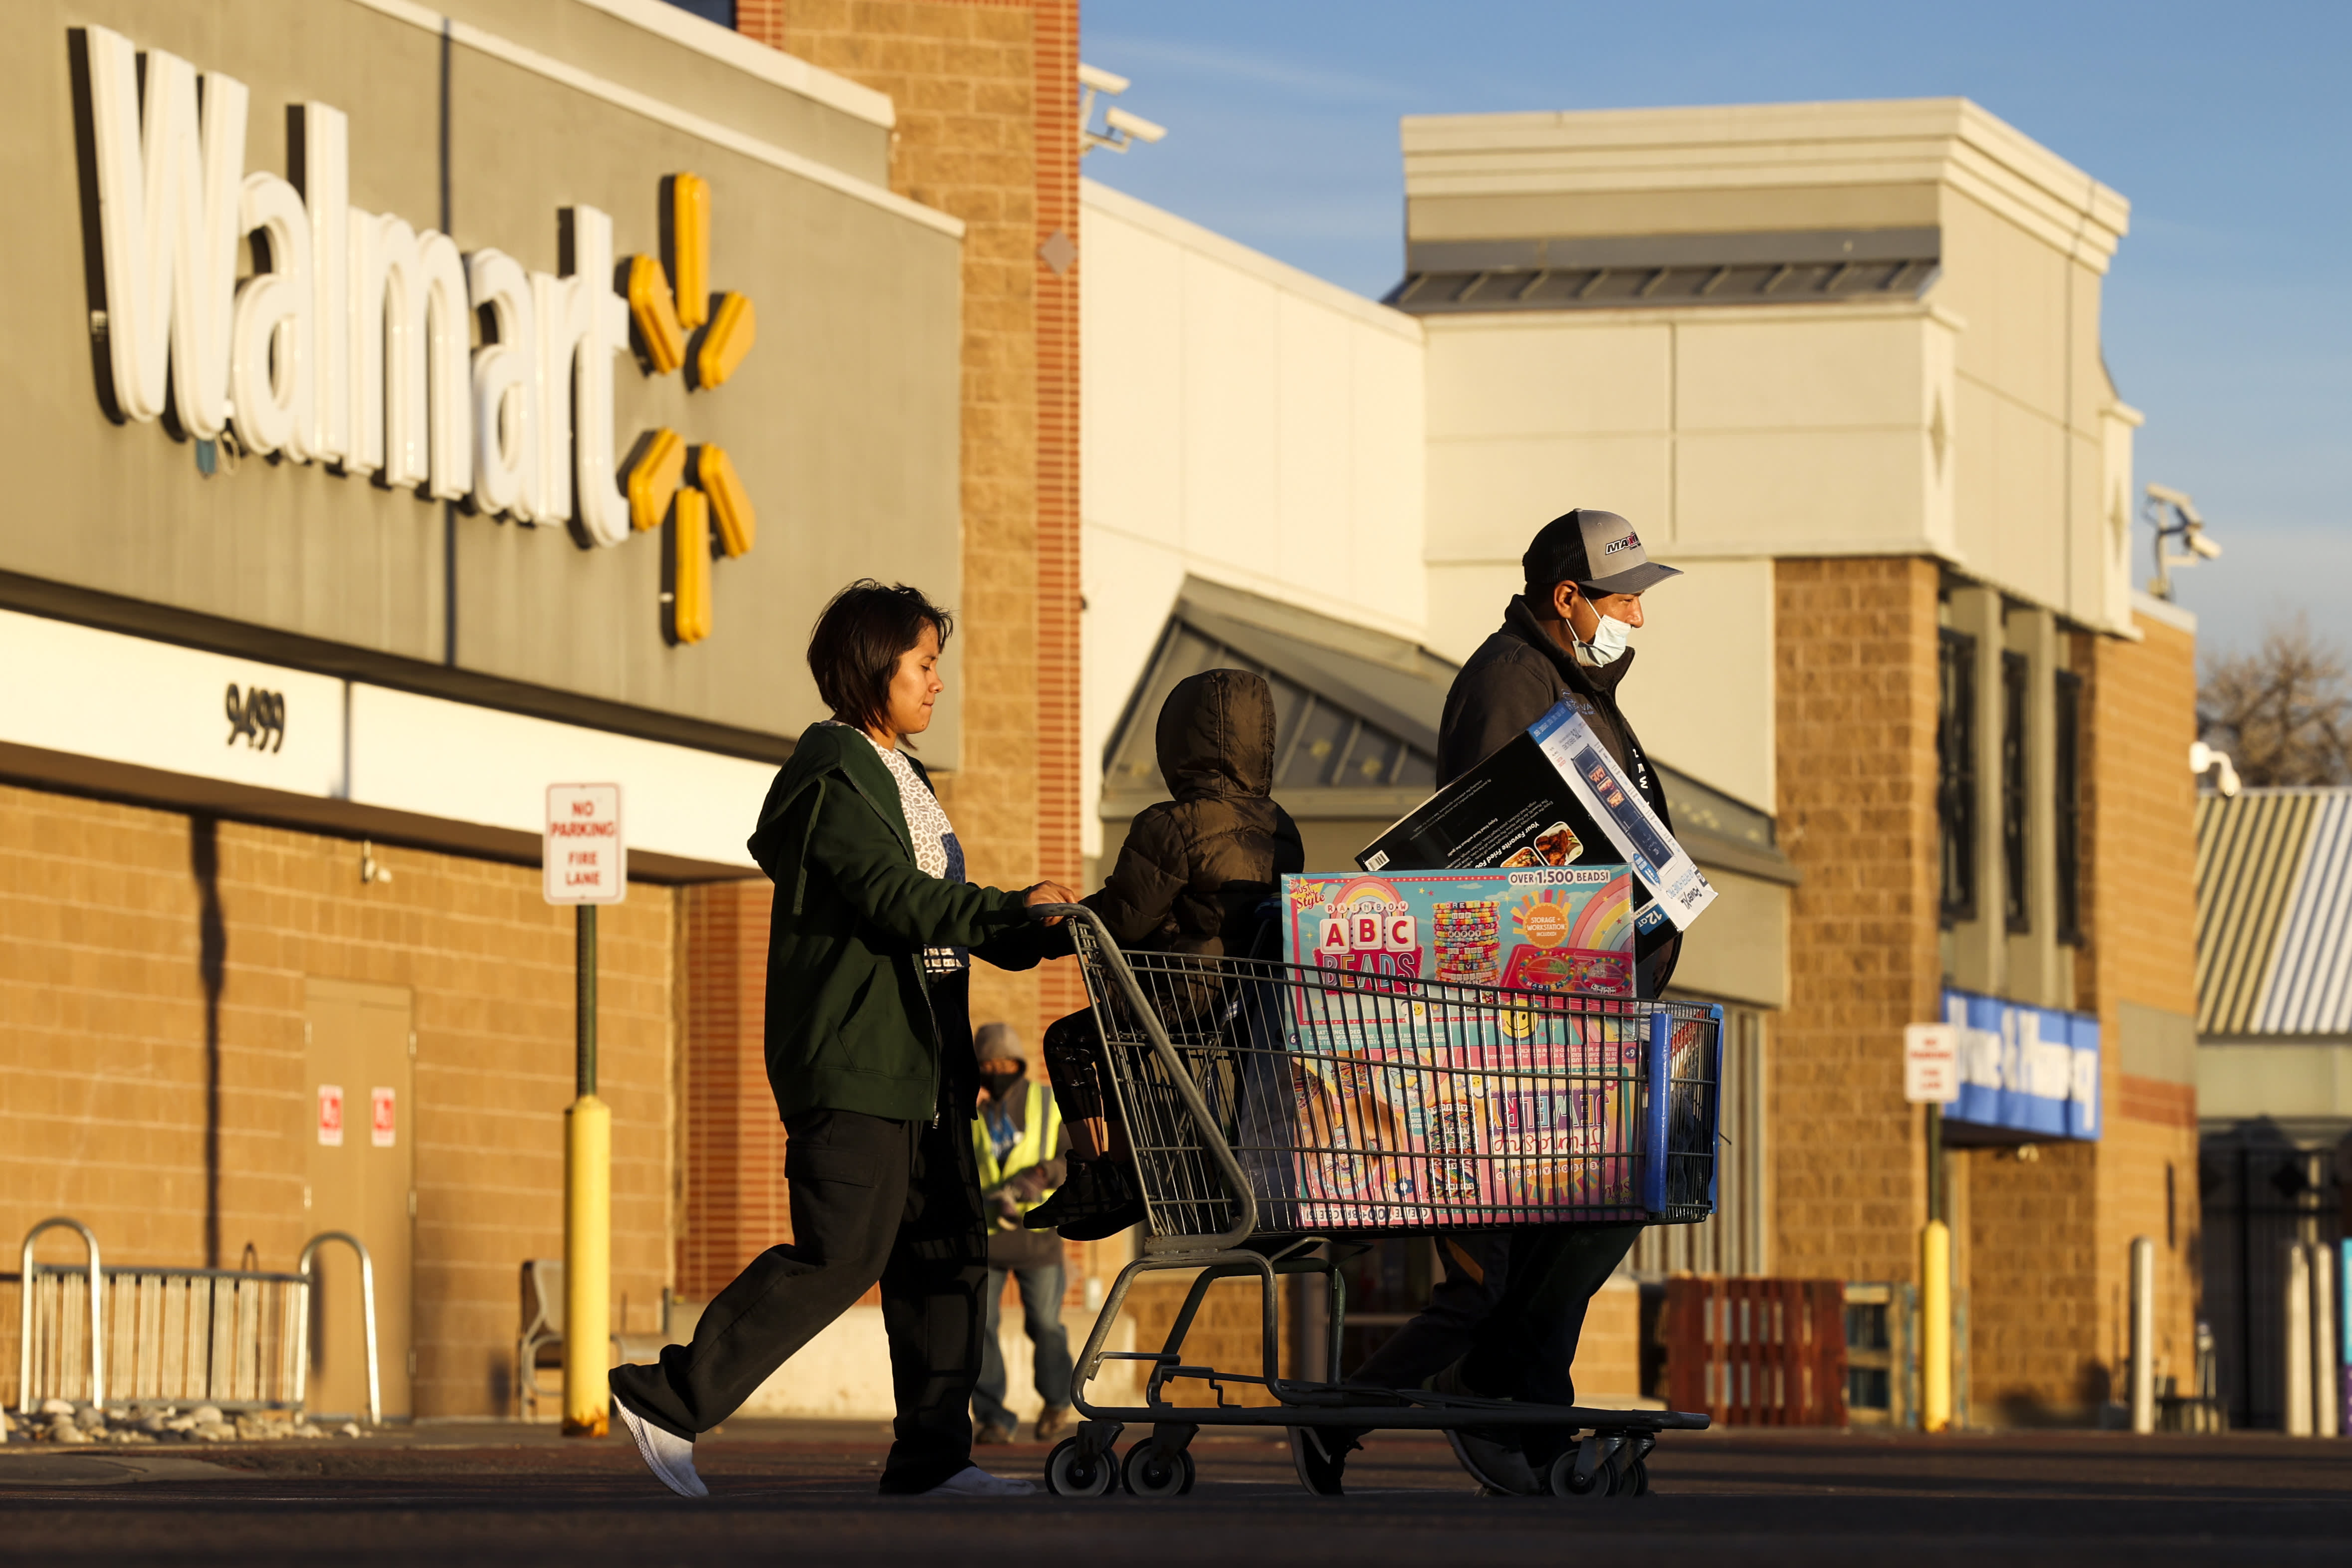 Retail sales dropped 1.9% in December as higher prices caused consumers to curb spending